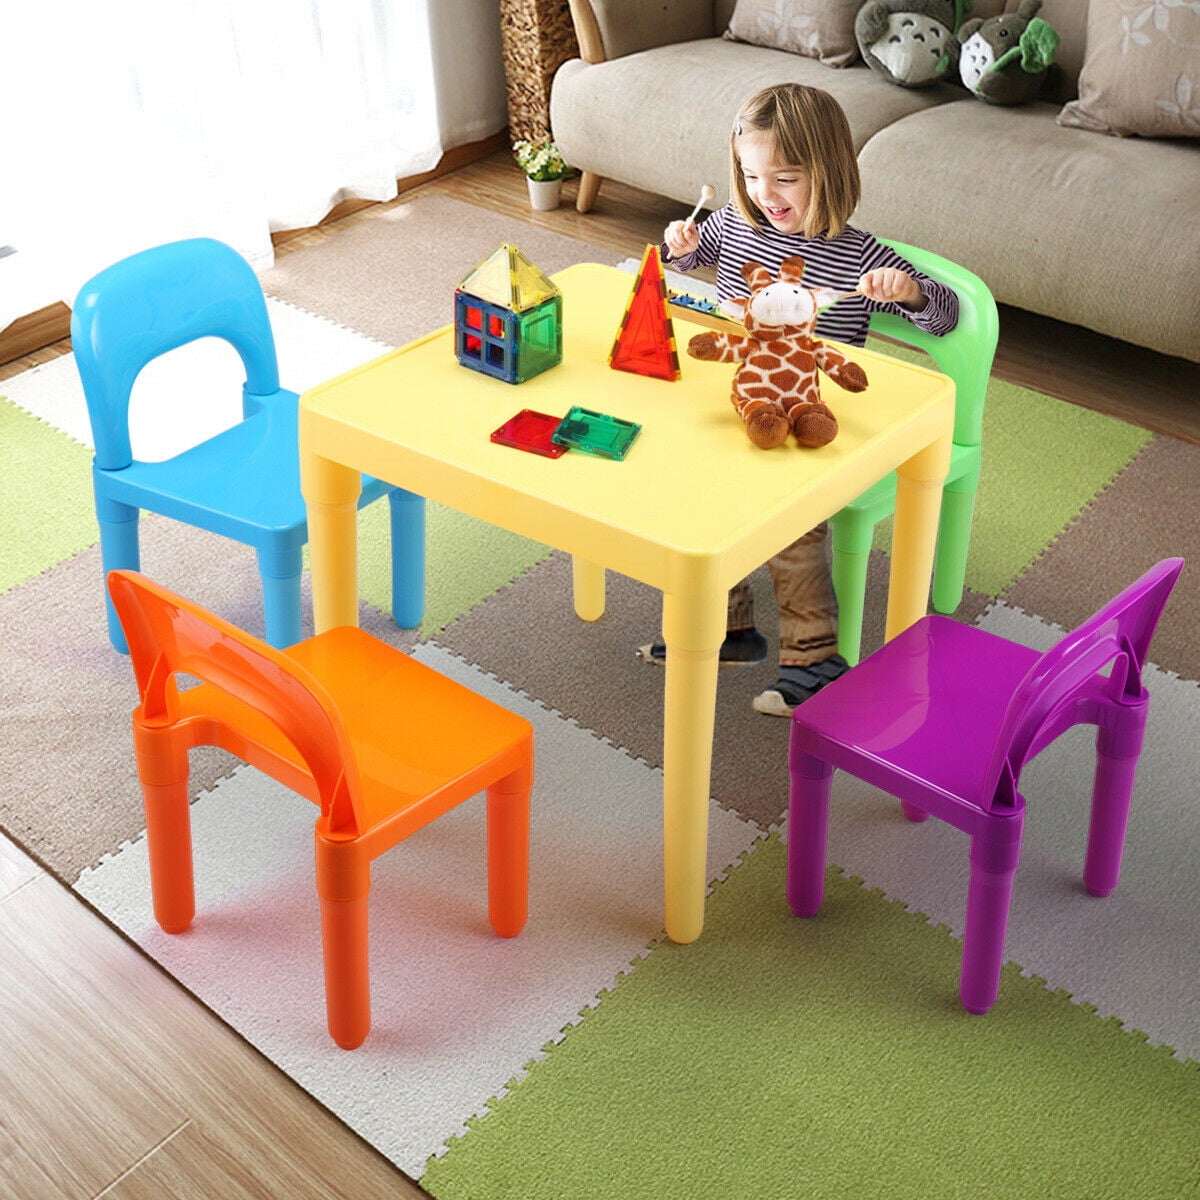 Veryke Kids Table and Chairs Set